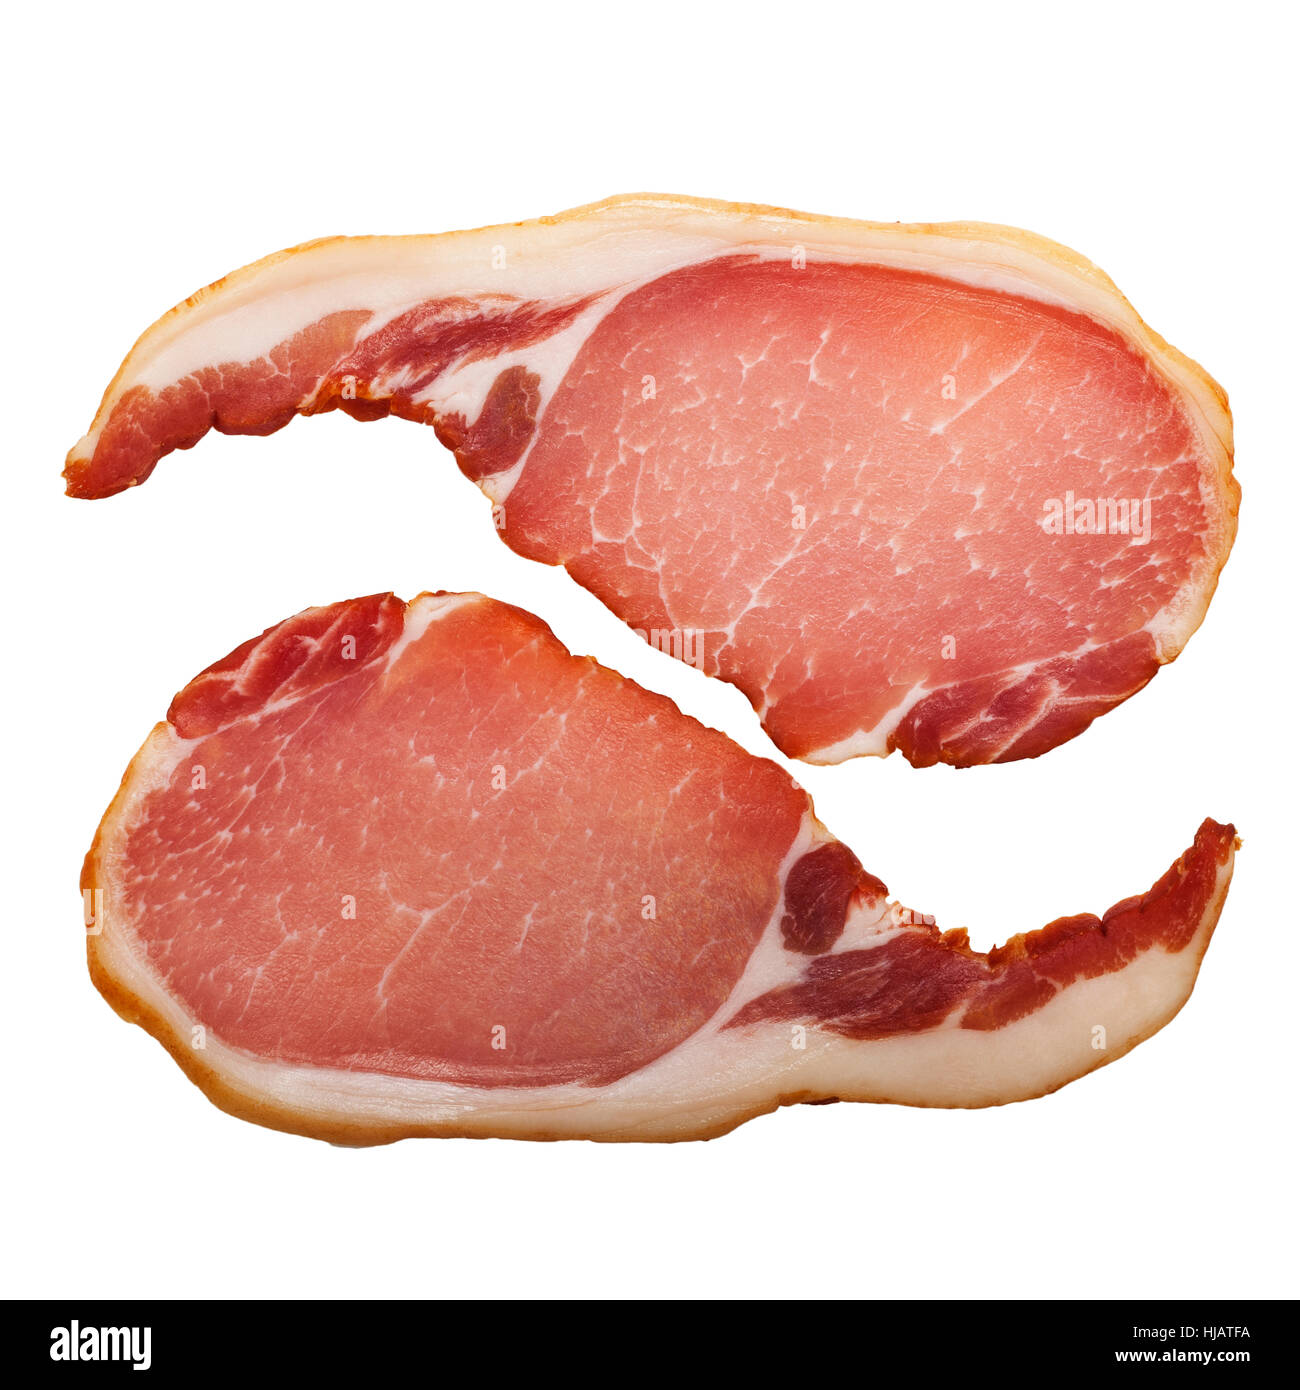 Uncooked rashers of bacon on a white background Stock Photo